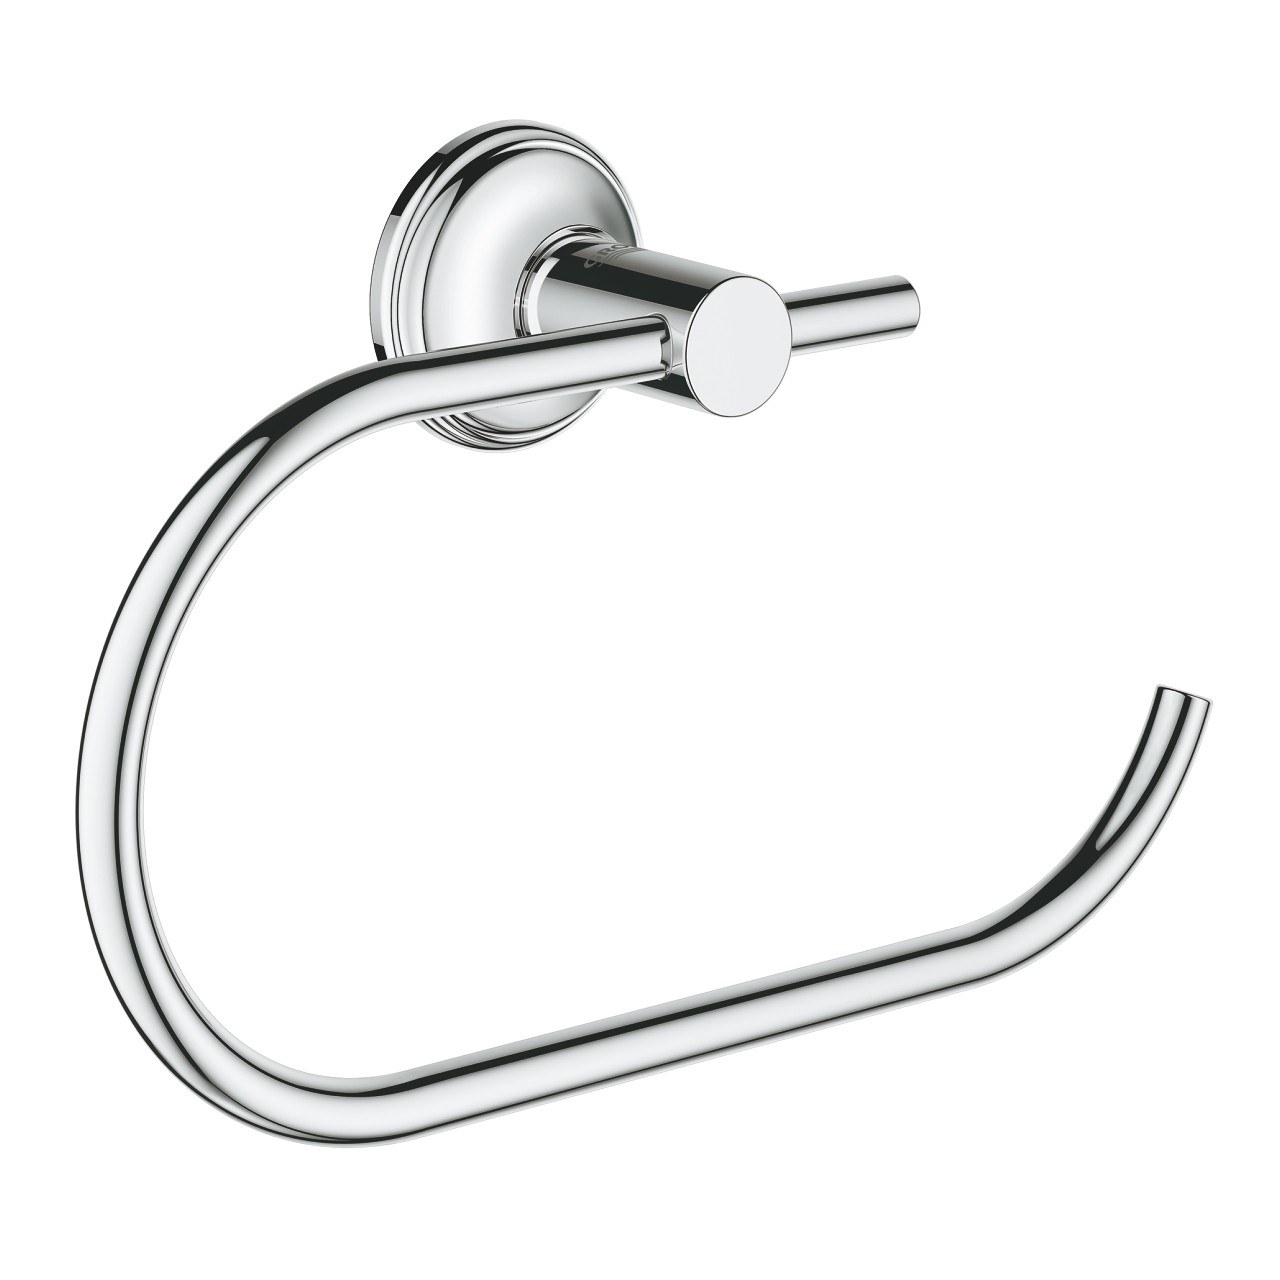 Grohe Essentials 40657001 Toilet Paper Holder, Chrome